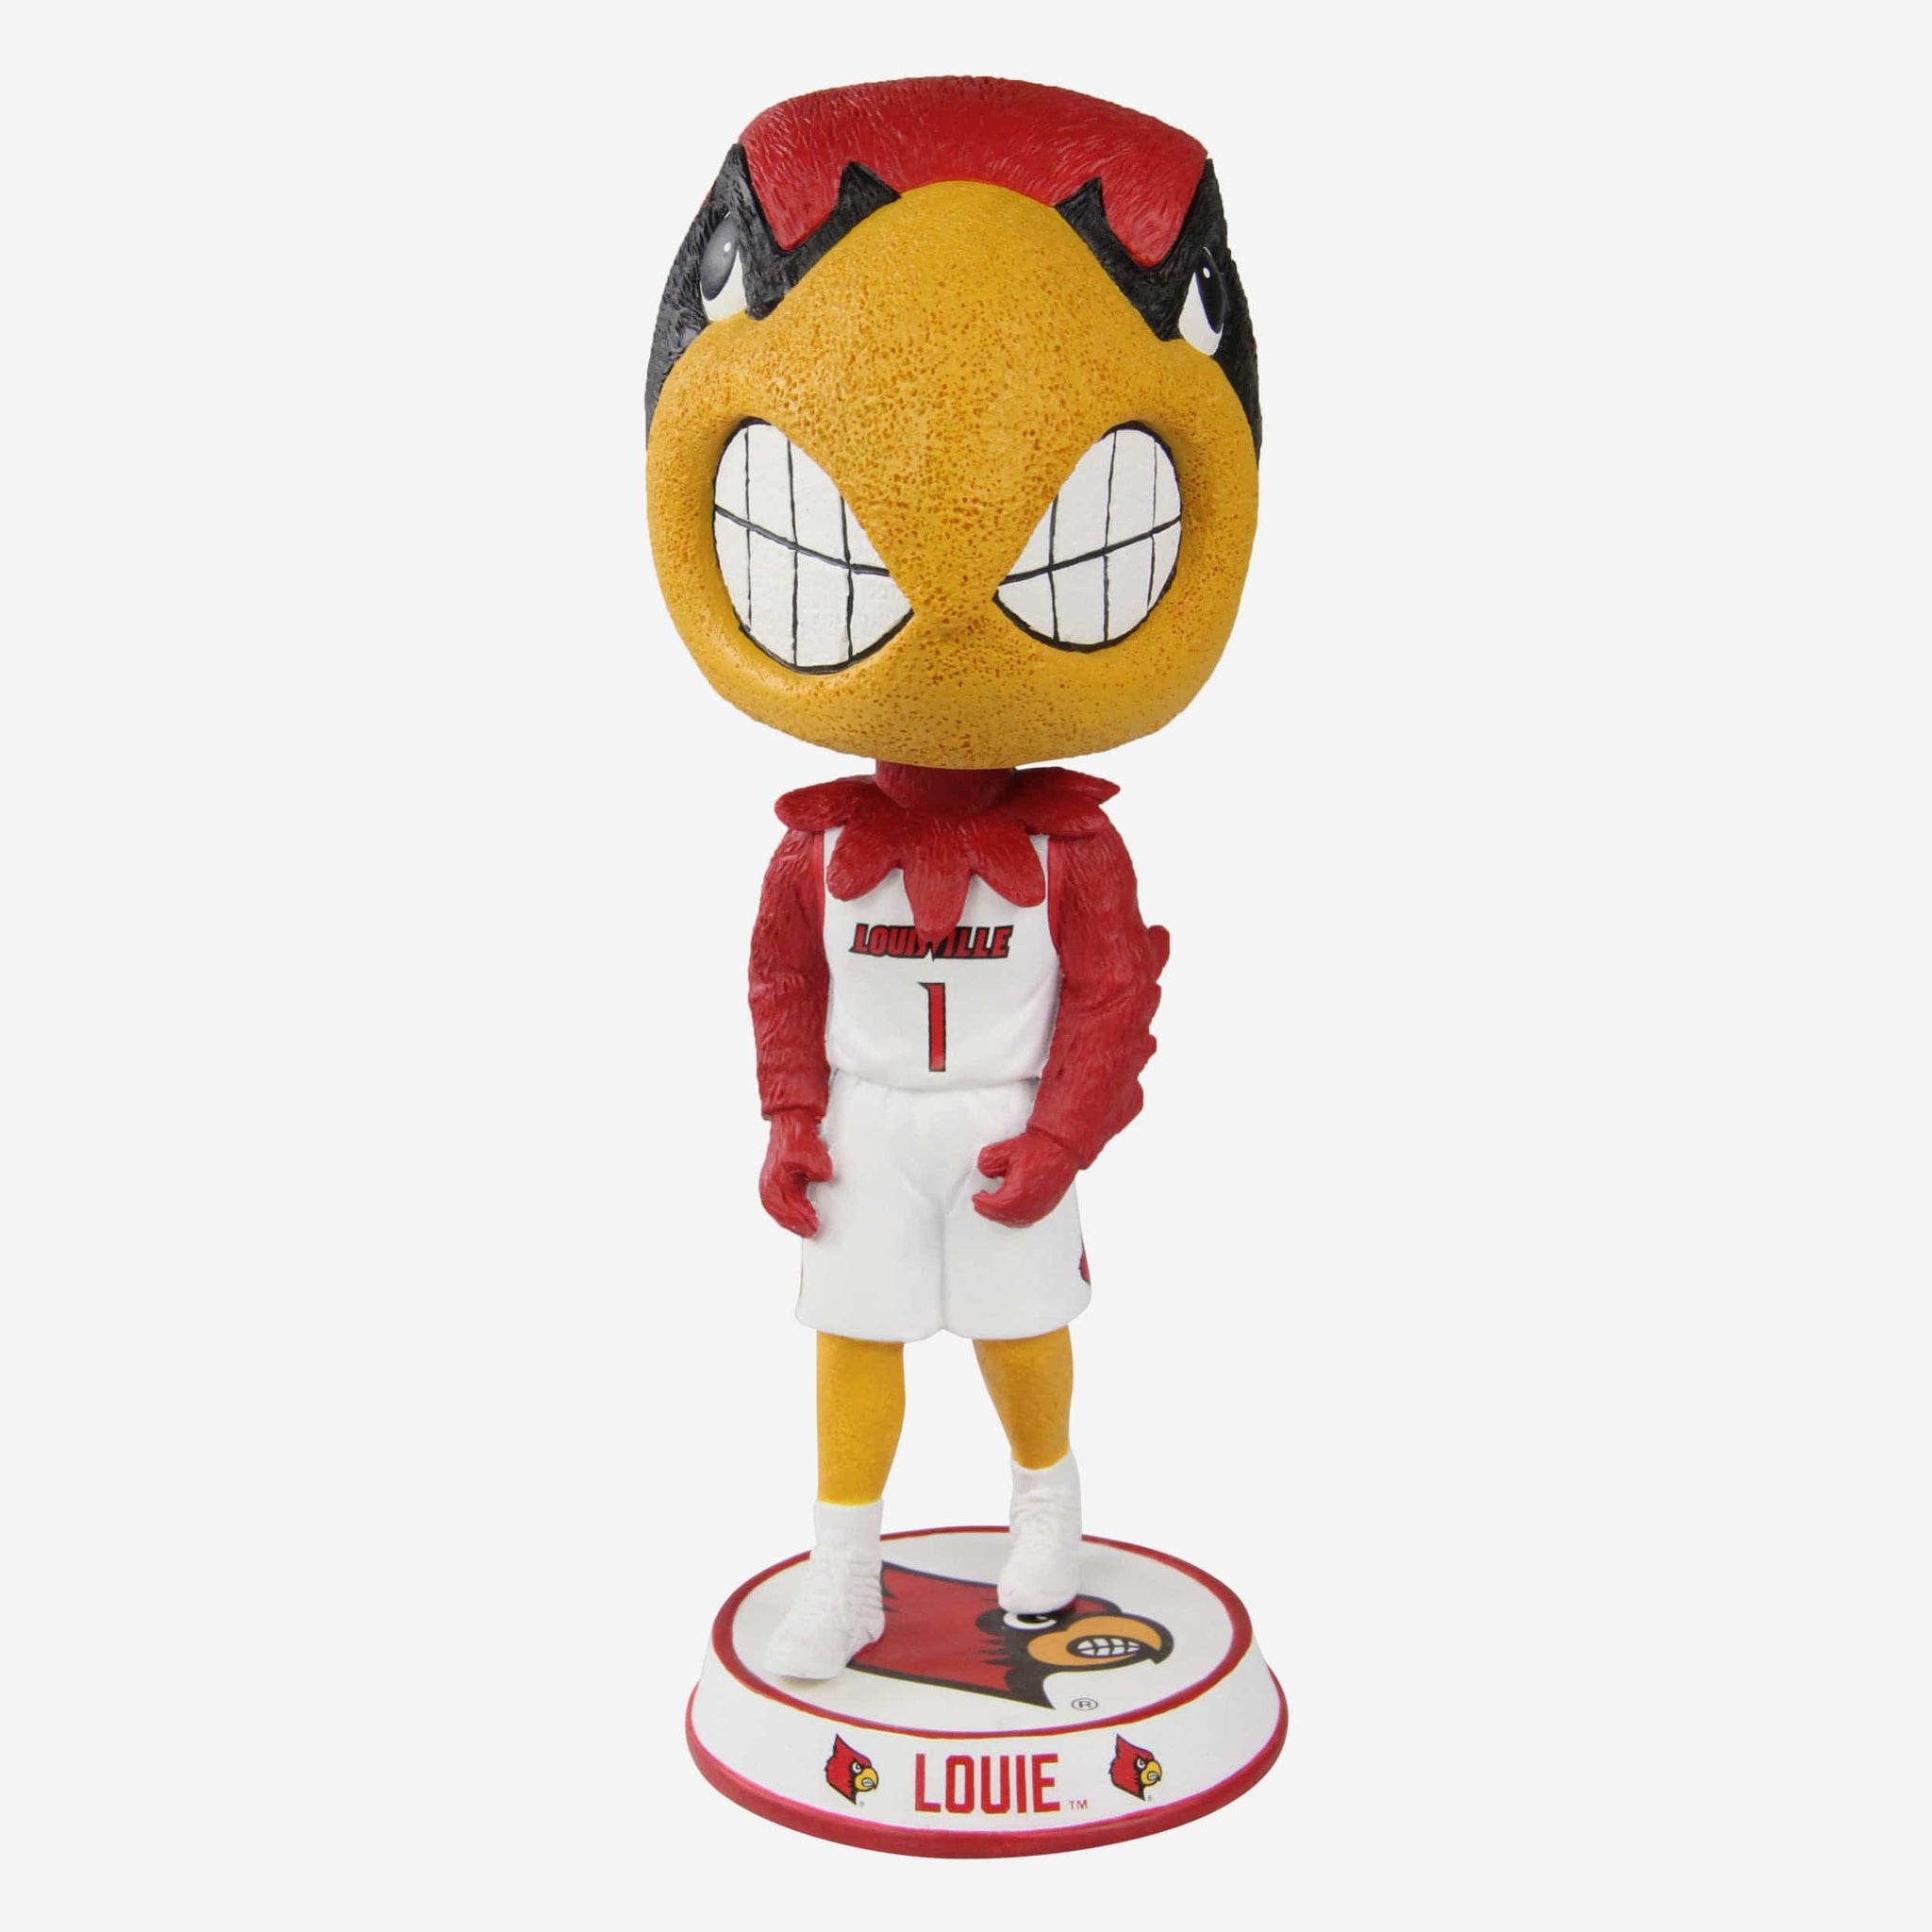 The newest Louie bobblehead could use some pants - St. Louis Game Time